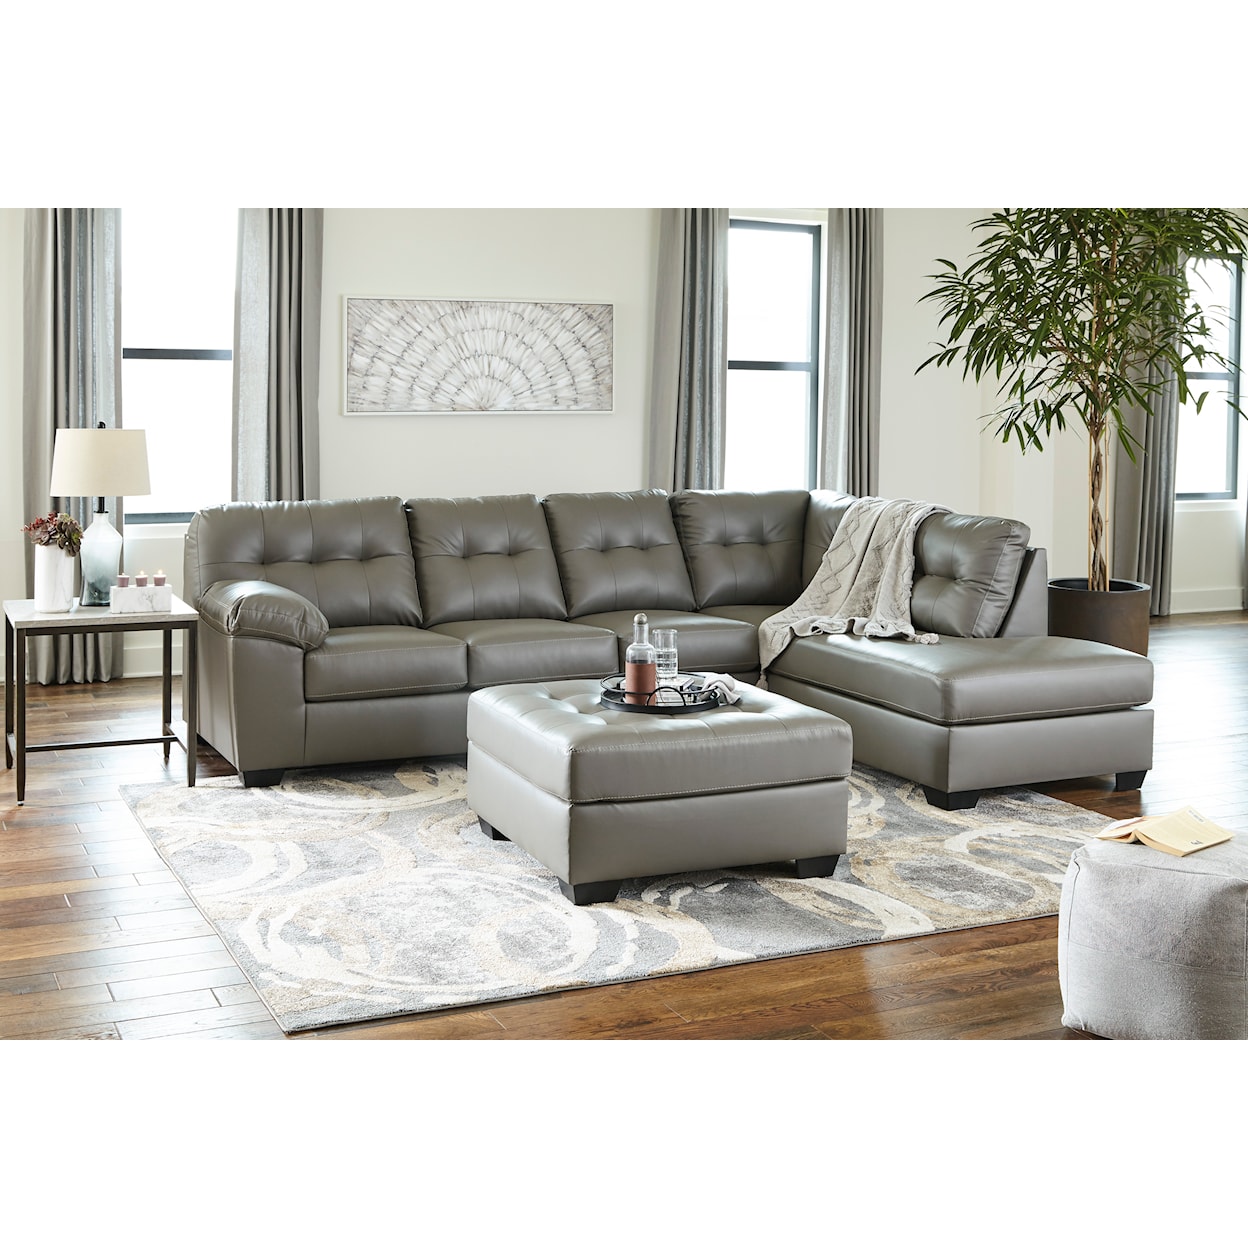 Ashley Furniture Signature Design Donlen Sectional and Ottoman